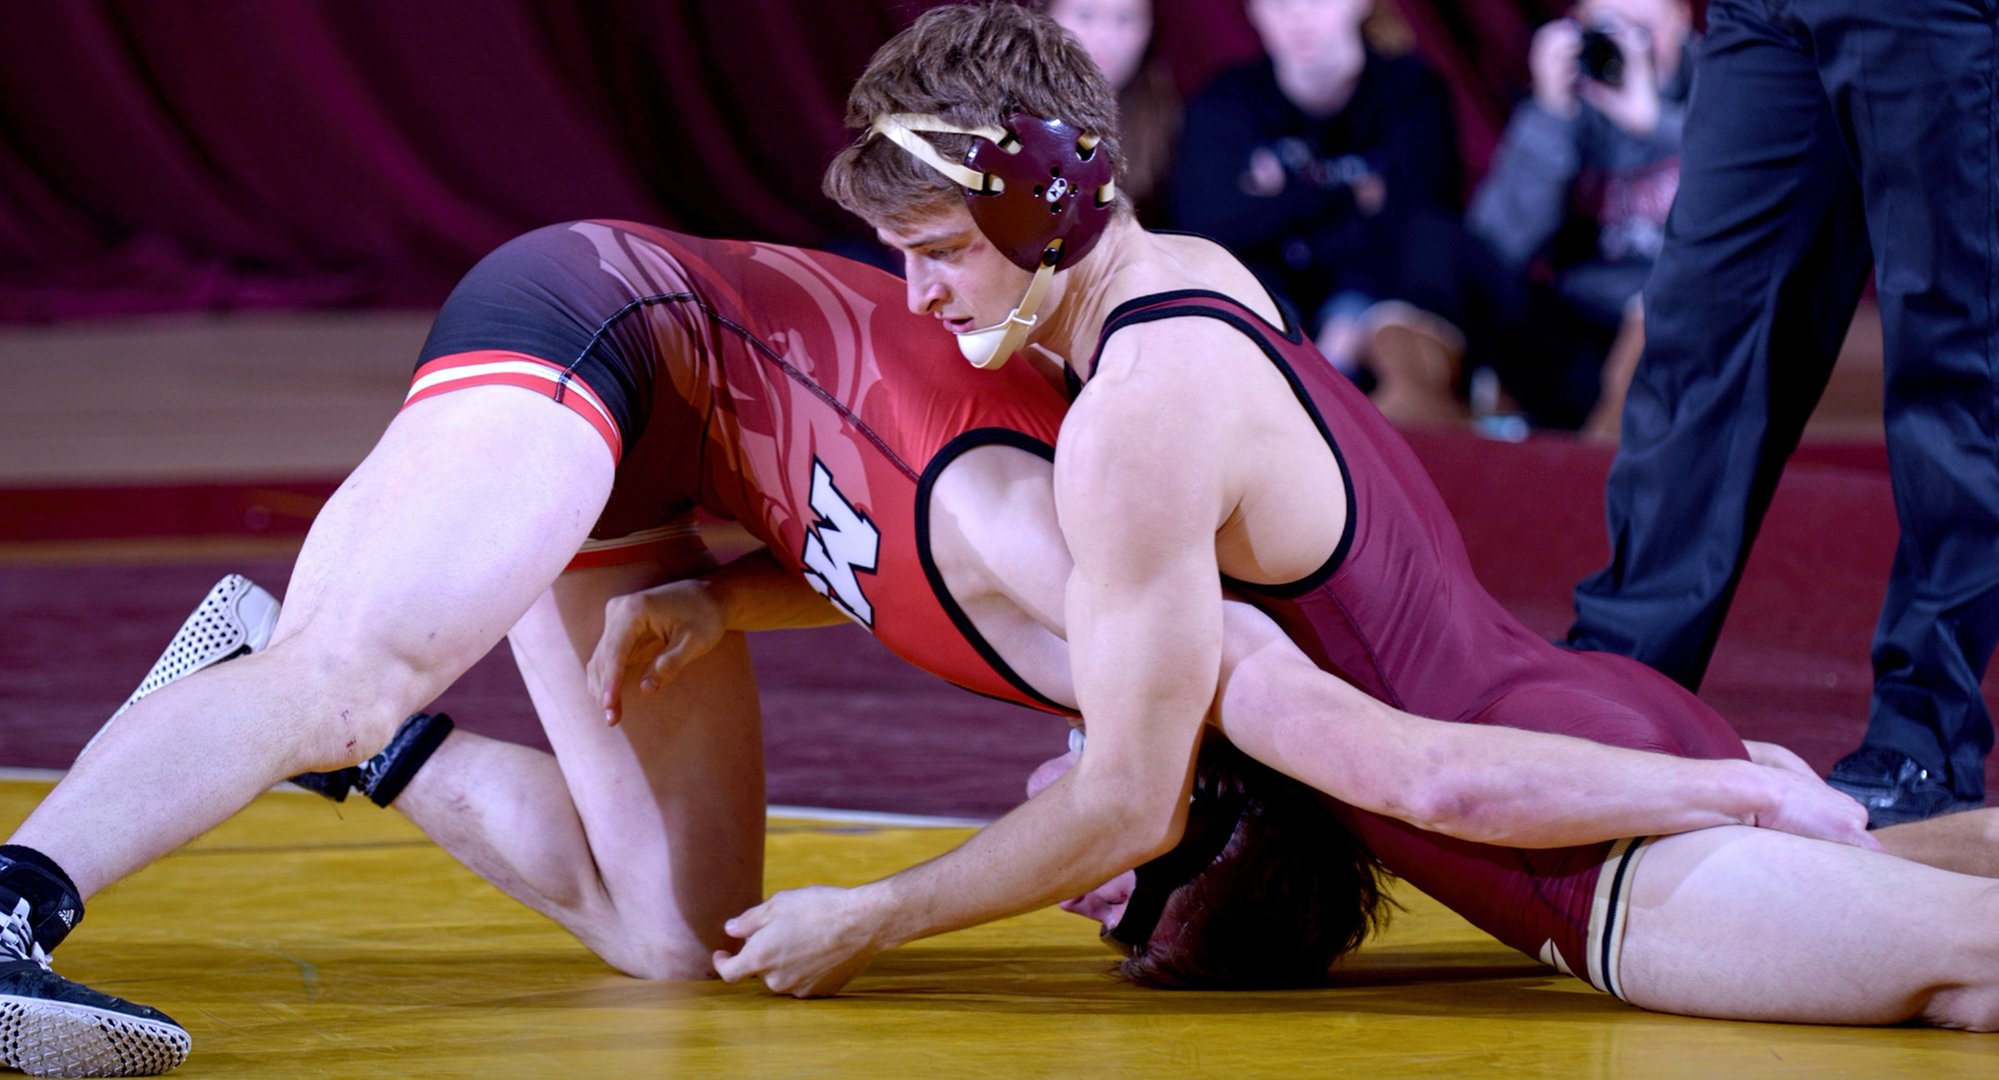 Junior Joe Heinz went 2-0 at the Desert Duals including a 2-1 win over the No.2-ranked wrestler in Division III at 165.